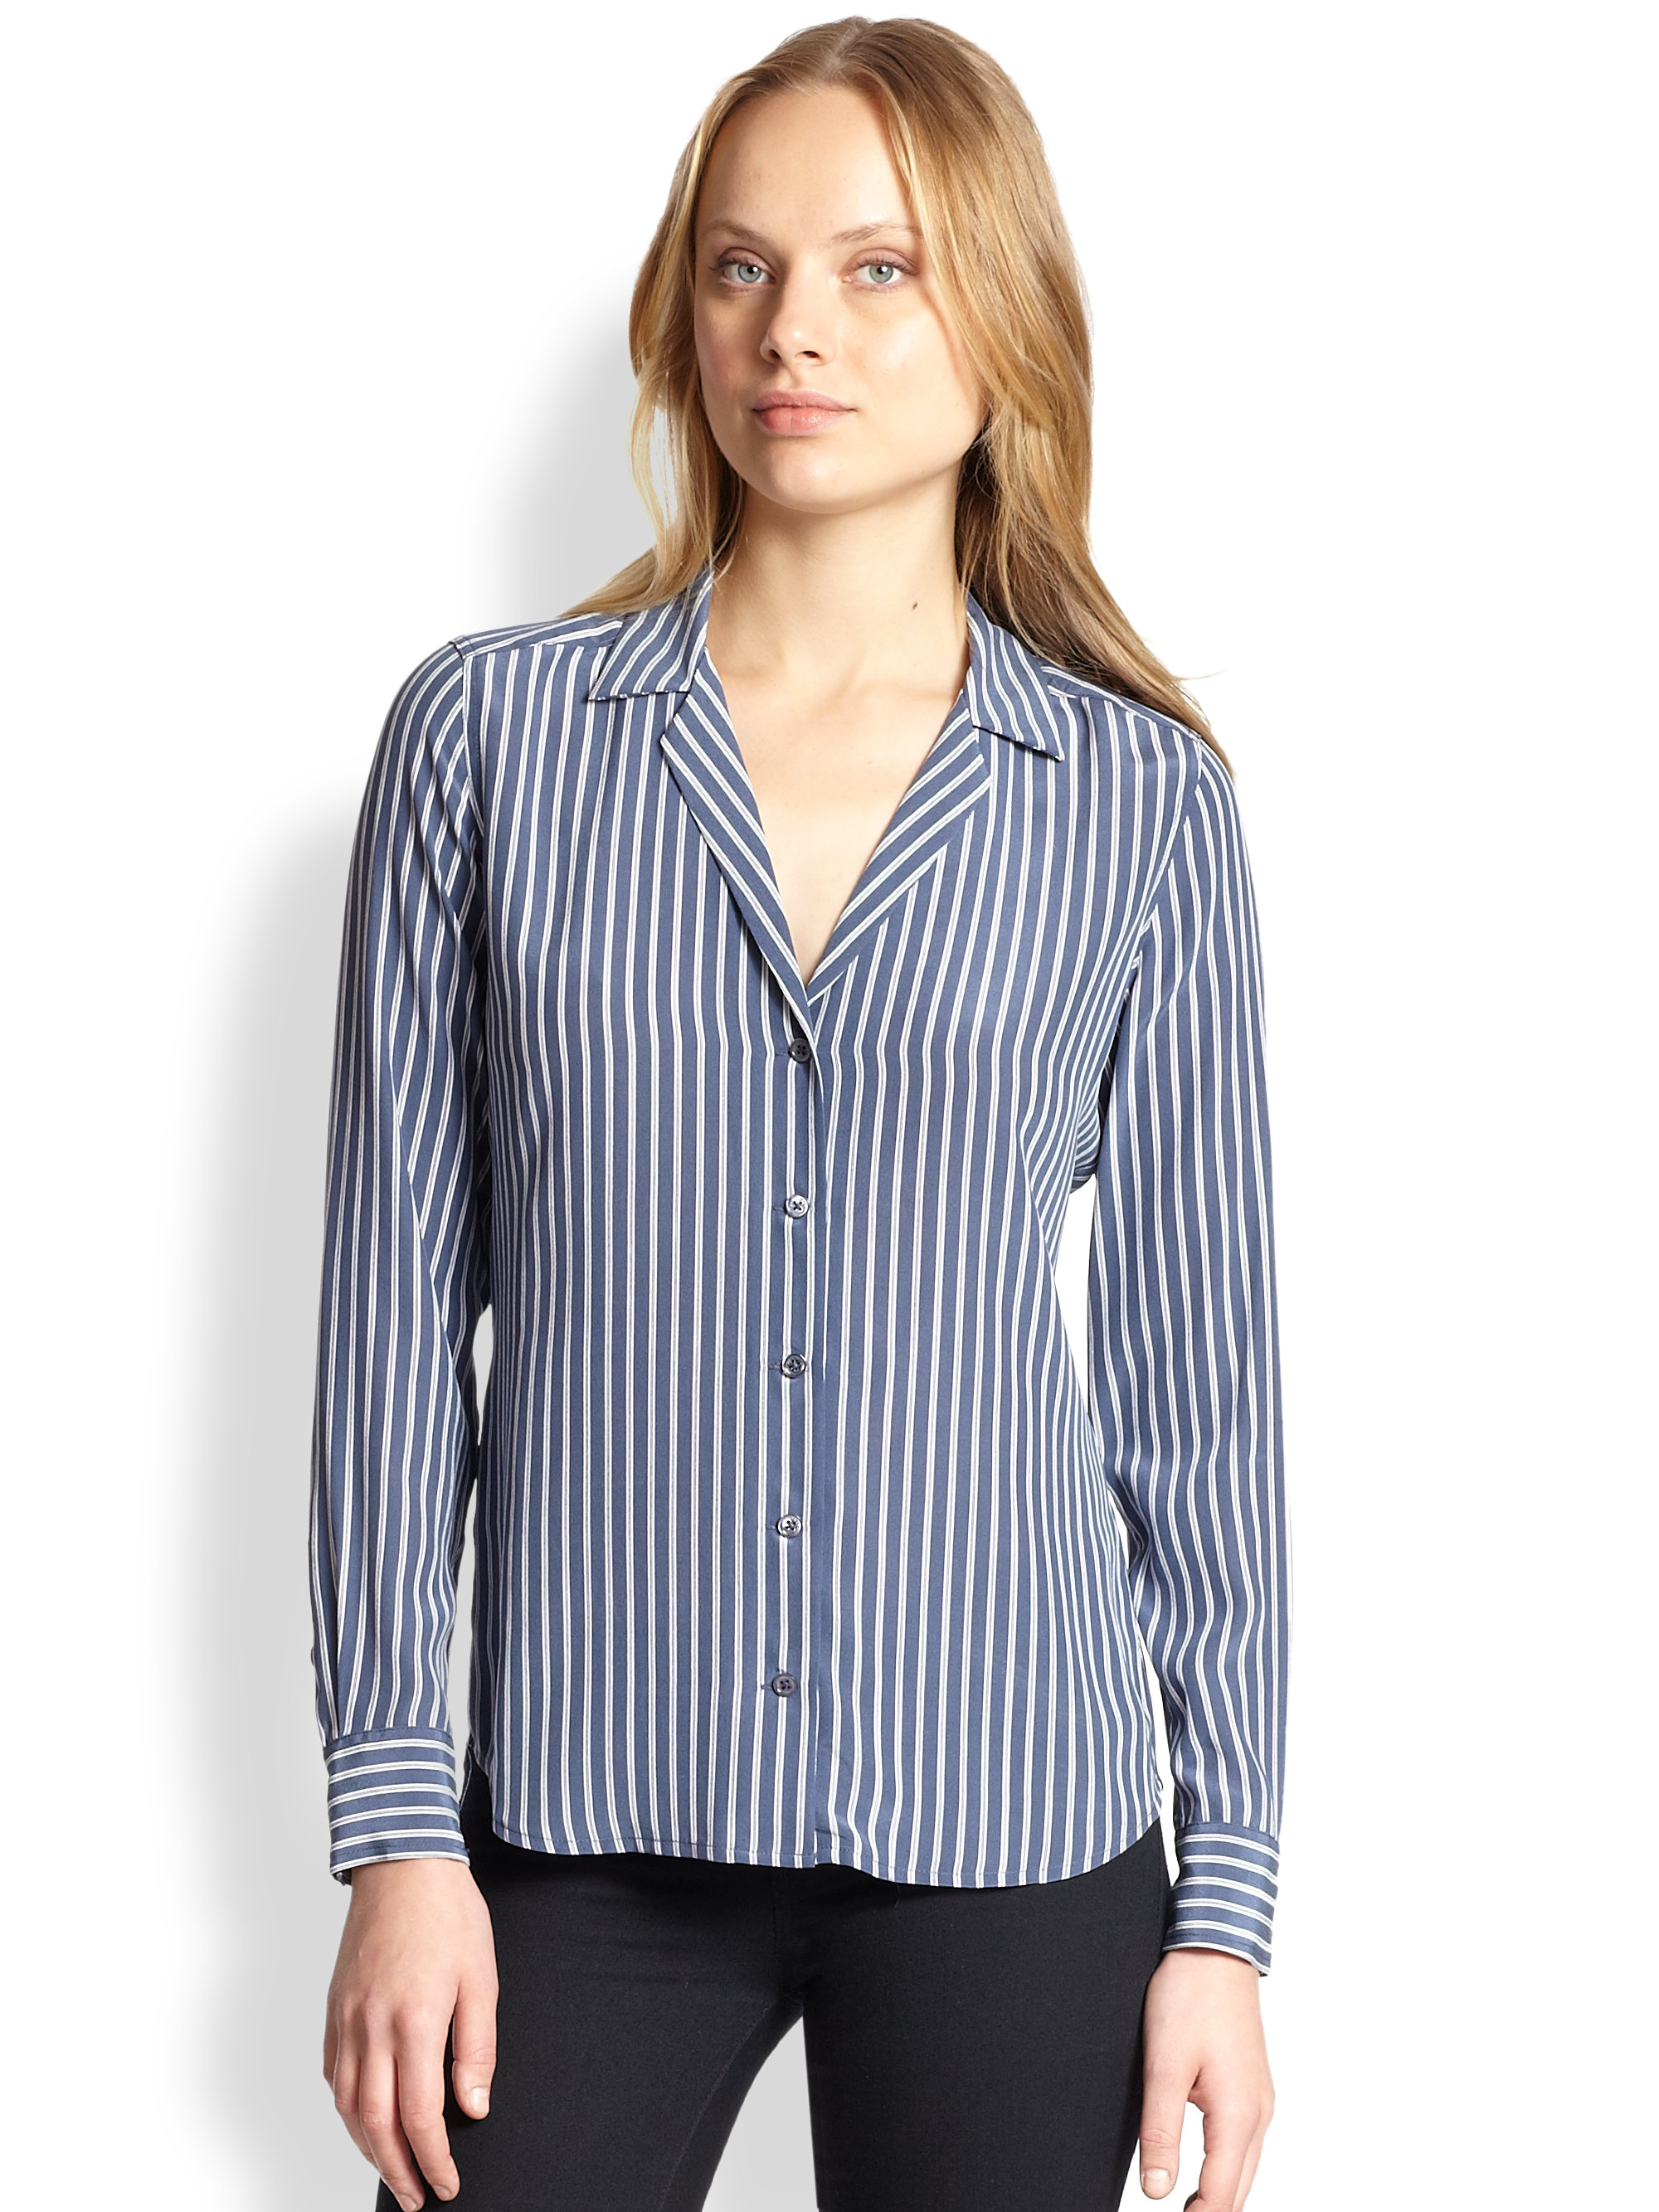 Products By Louis Vuitton: Game On Detail Stripe Work Shirt | IUCN Water